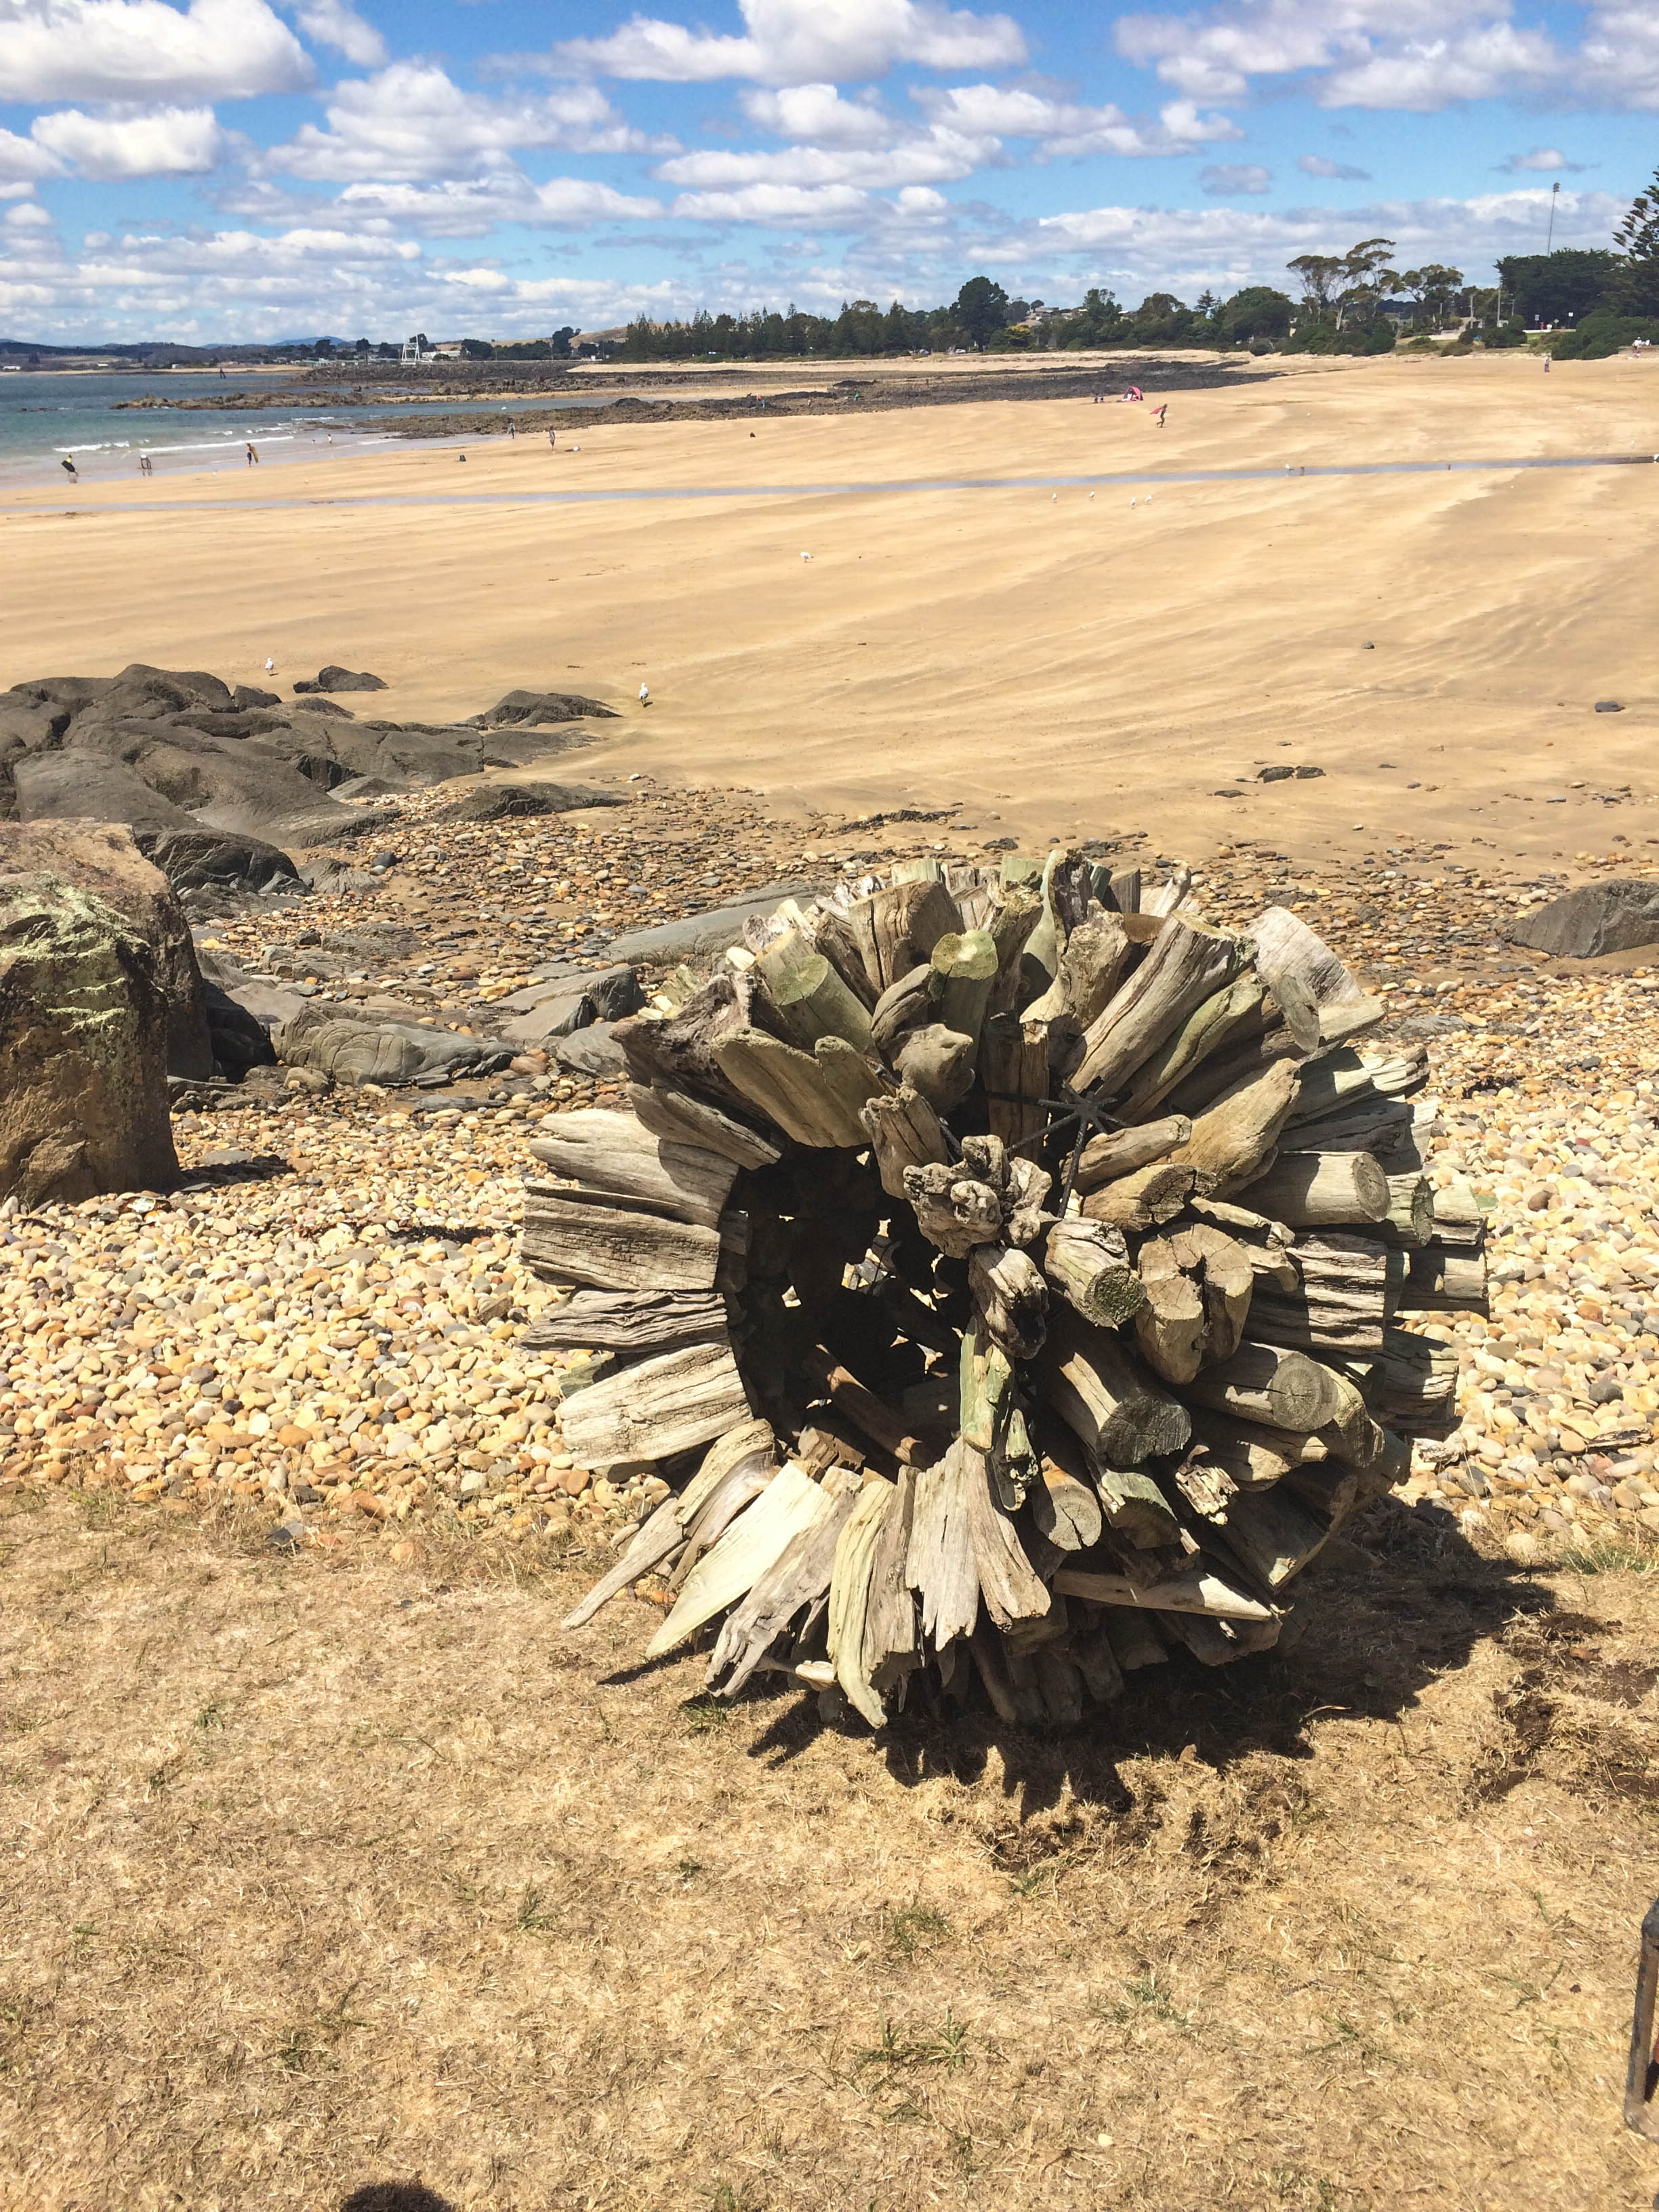 Marcus Tatton's sculpture at the Bluff, work in progress for Tidal 